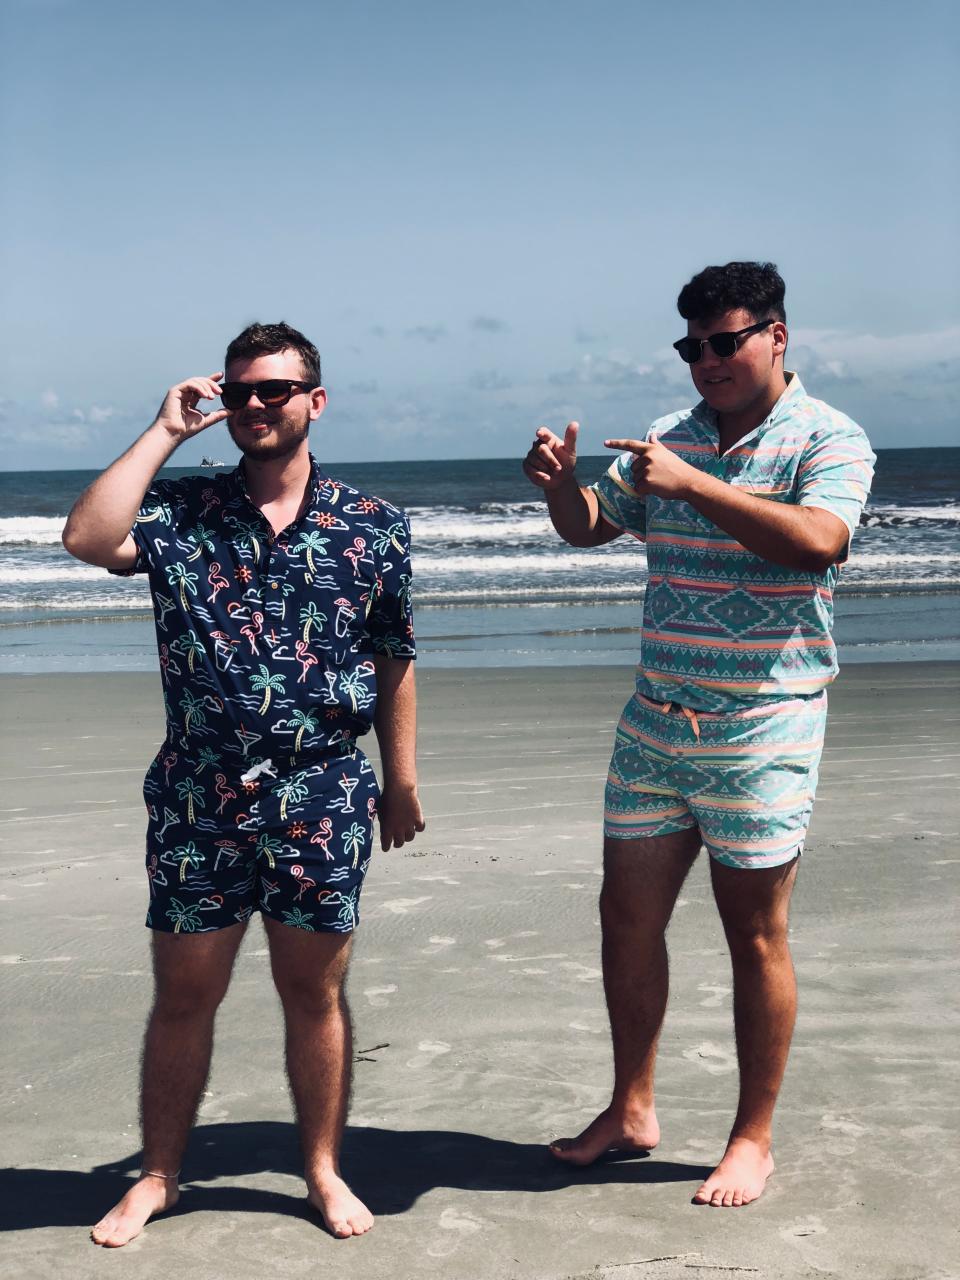 Nate Jones (right) and a friend have some fun while Nate models his swimwear.